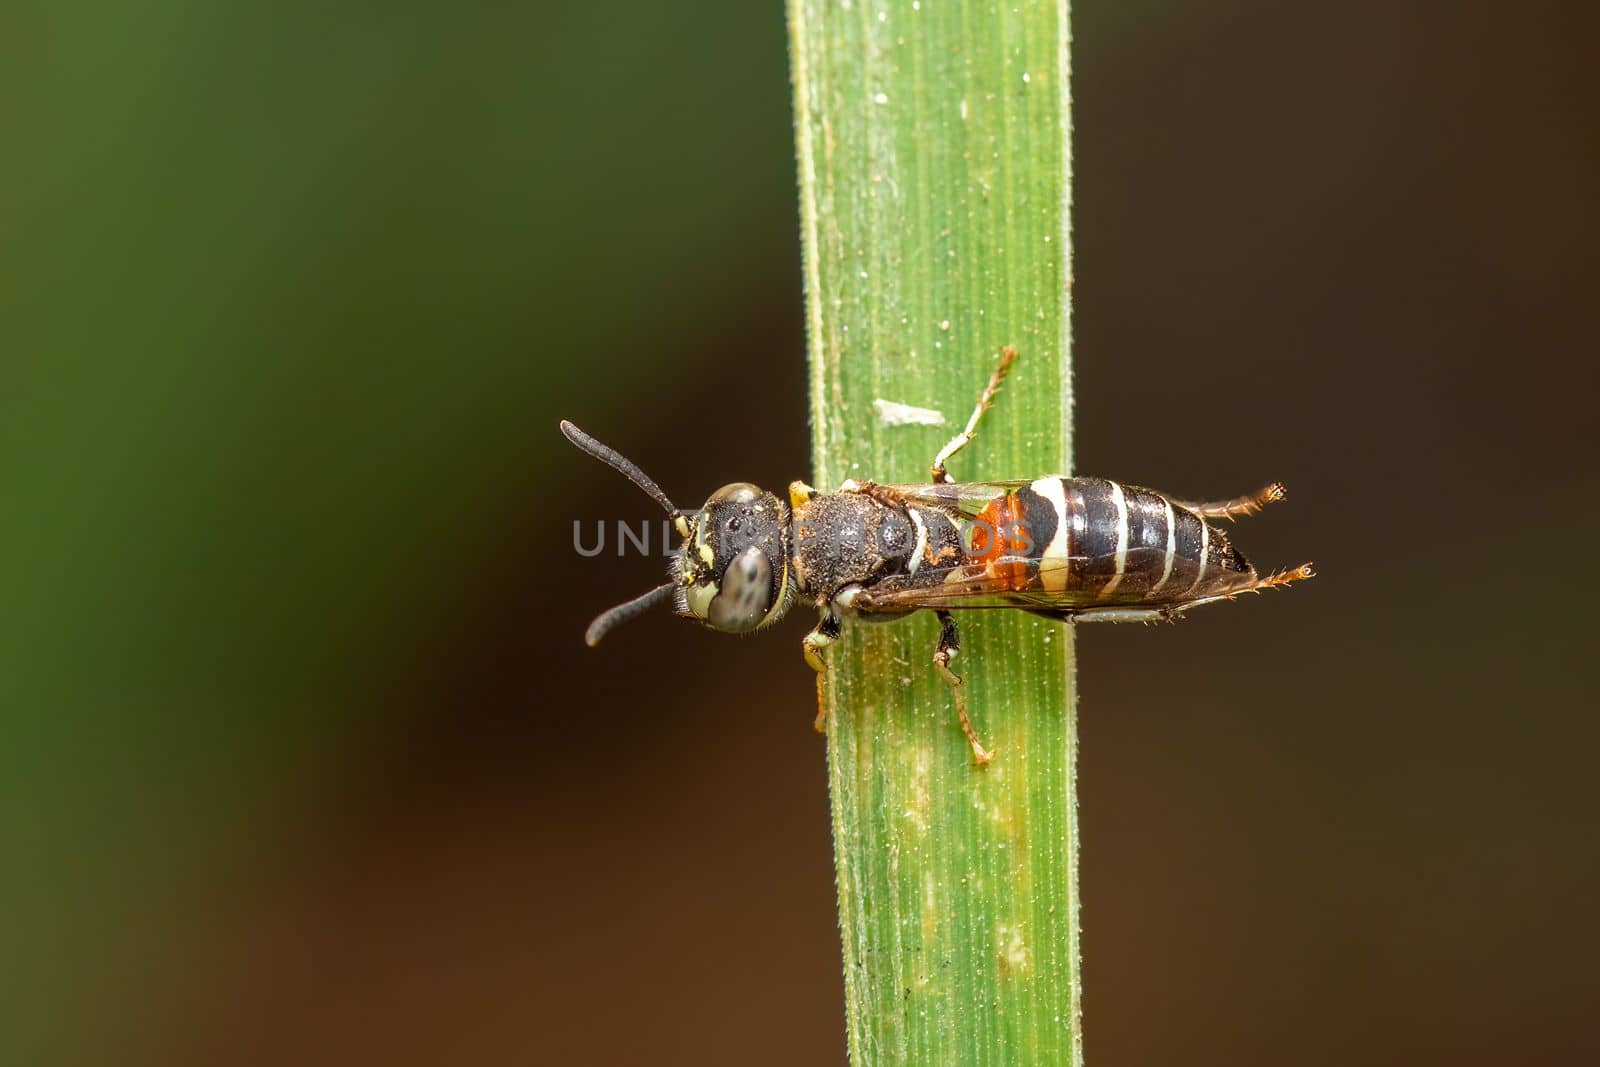 Image of little bee or dwarf bee(Apis florea) on the green leaf on a natural background. Insect. Animal.